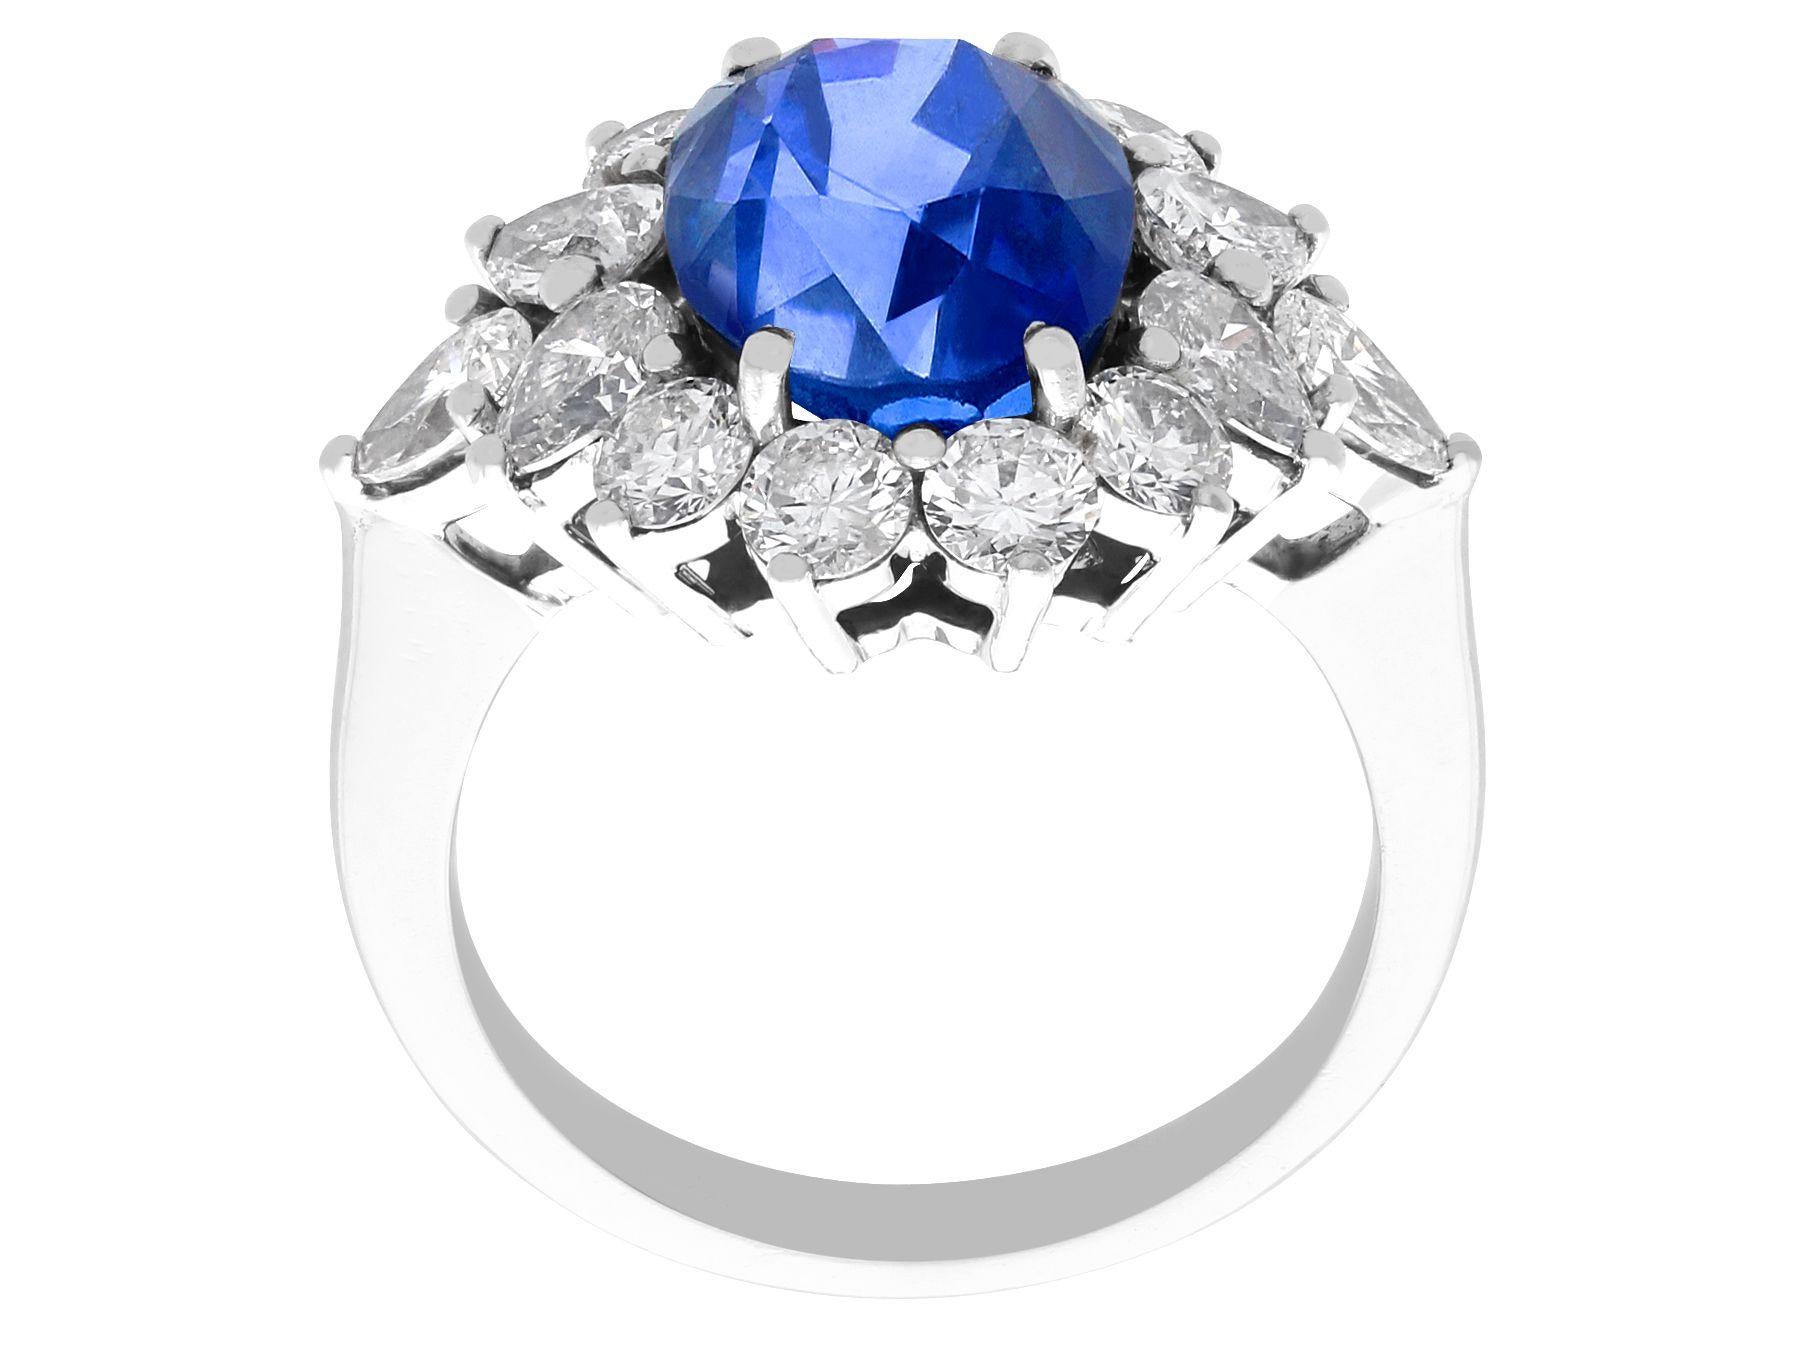 Women's or Men's Vintage 6.83ct Sapphire and 2.84ct Diamond Platinum Cocktail Ring, circa 1970 For Sale